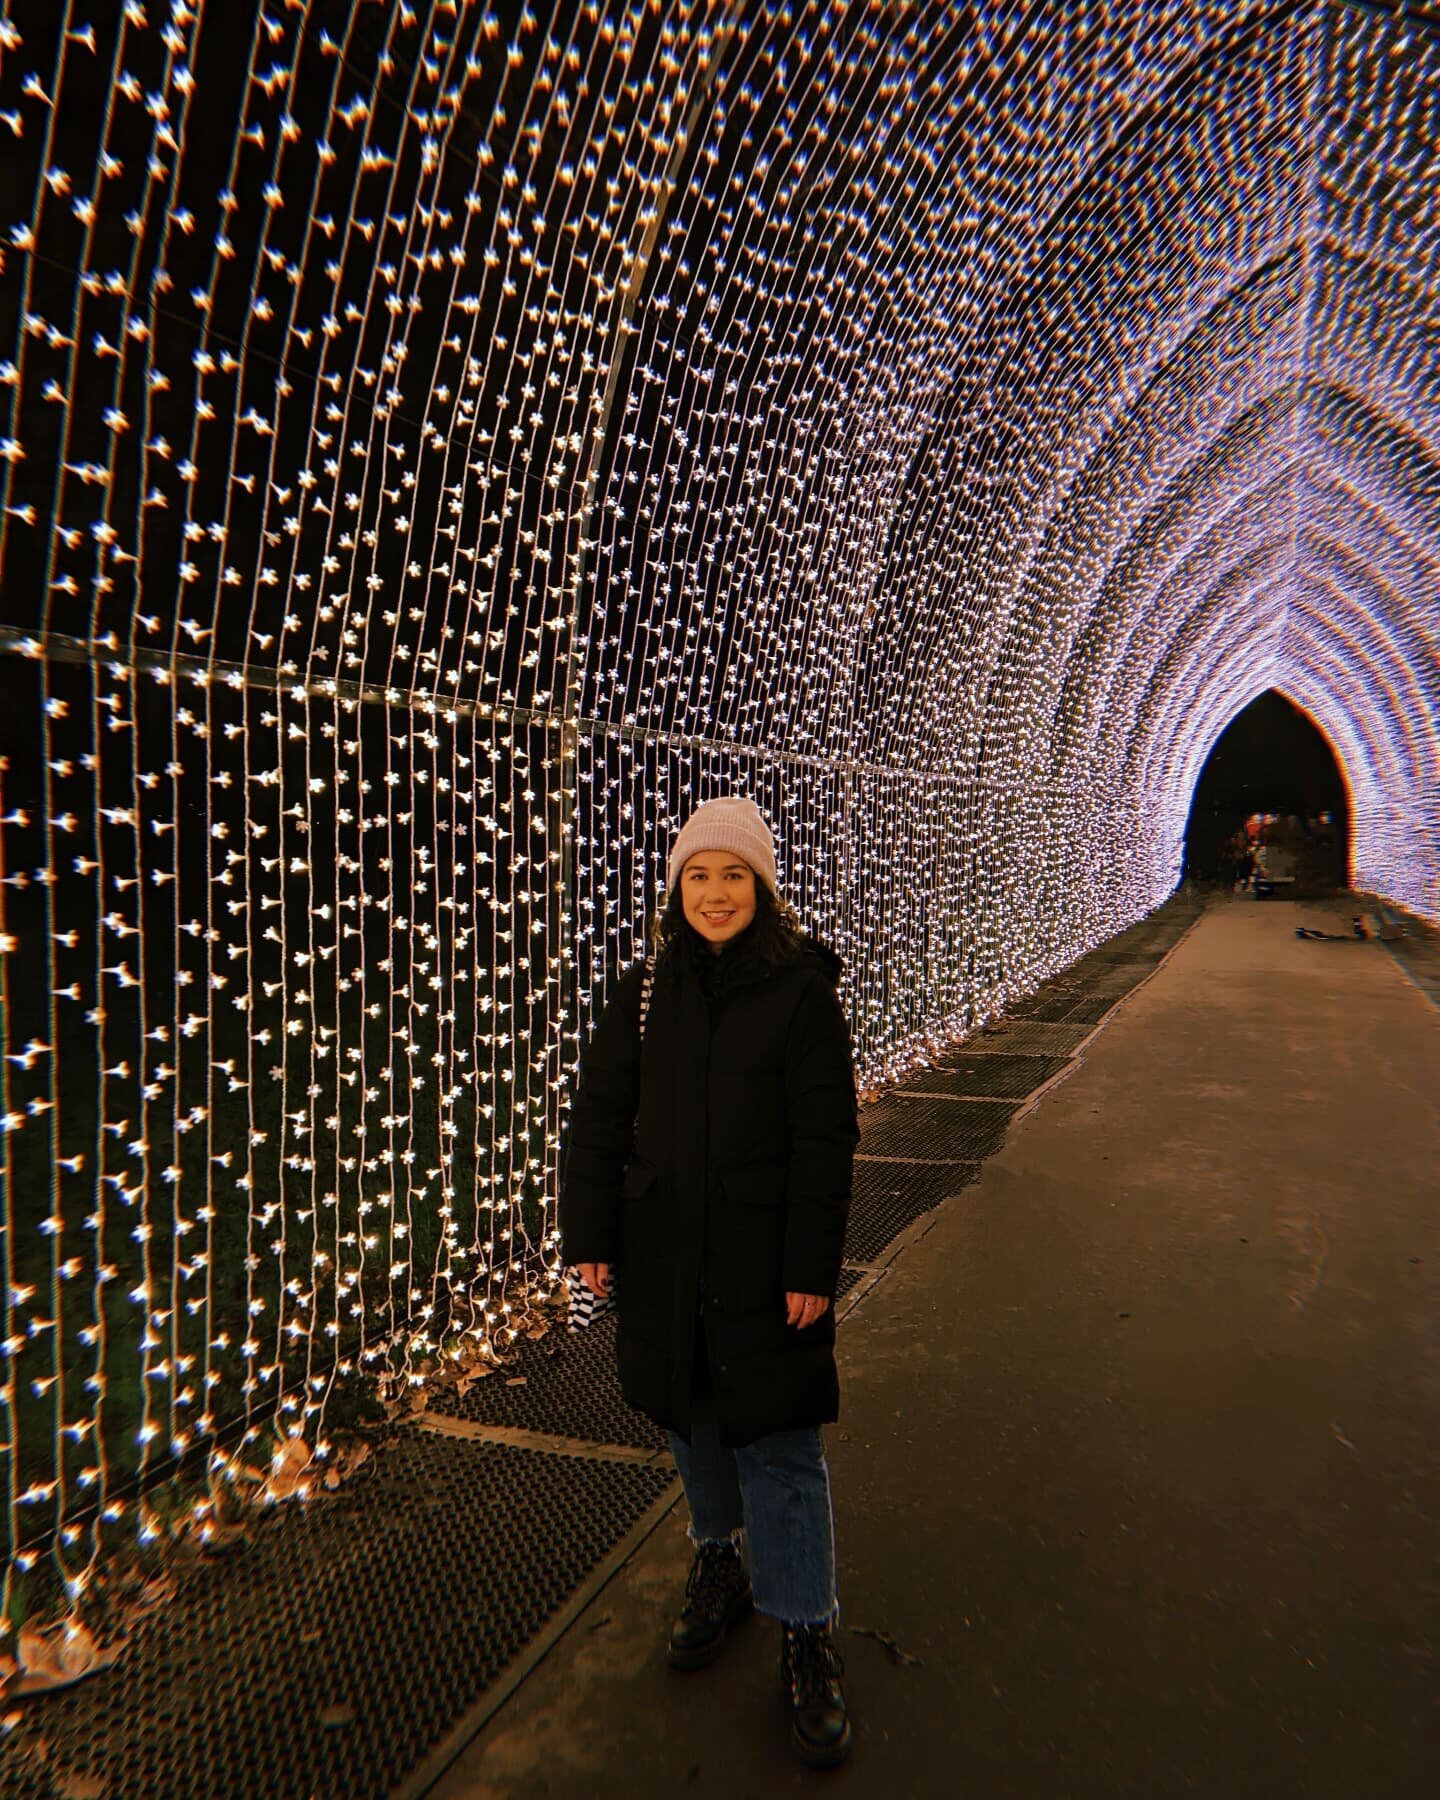 Only time you'll catch me wearing black is when it's freezing outside 🖤❄️ #christmasatkew